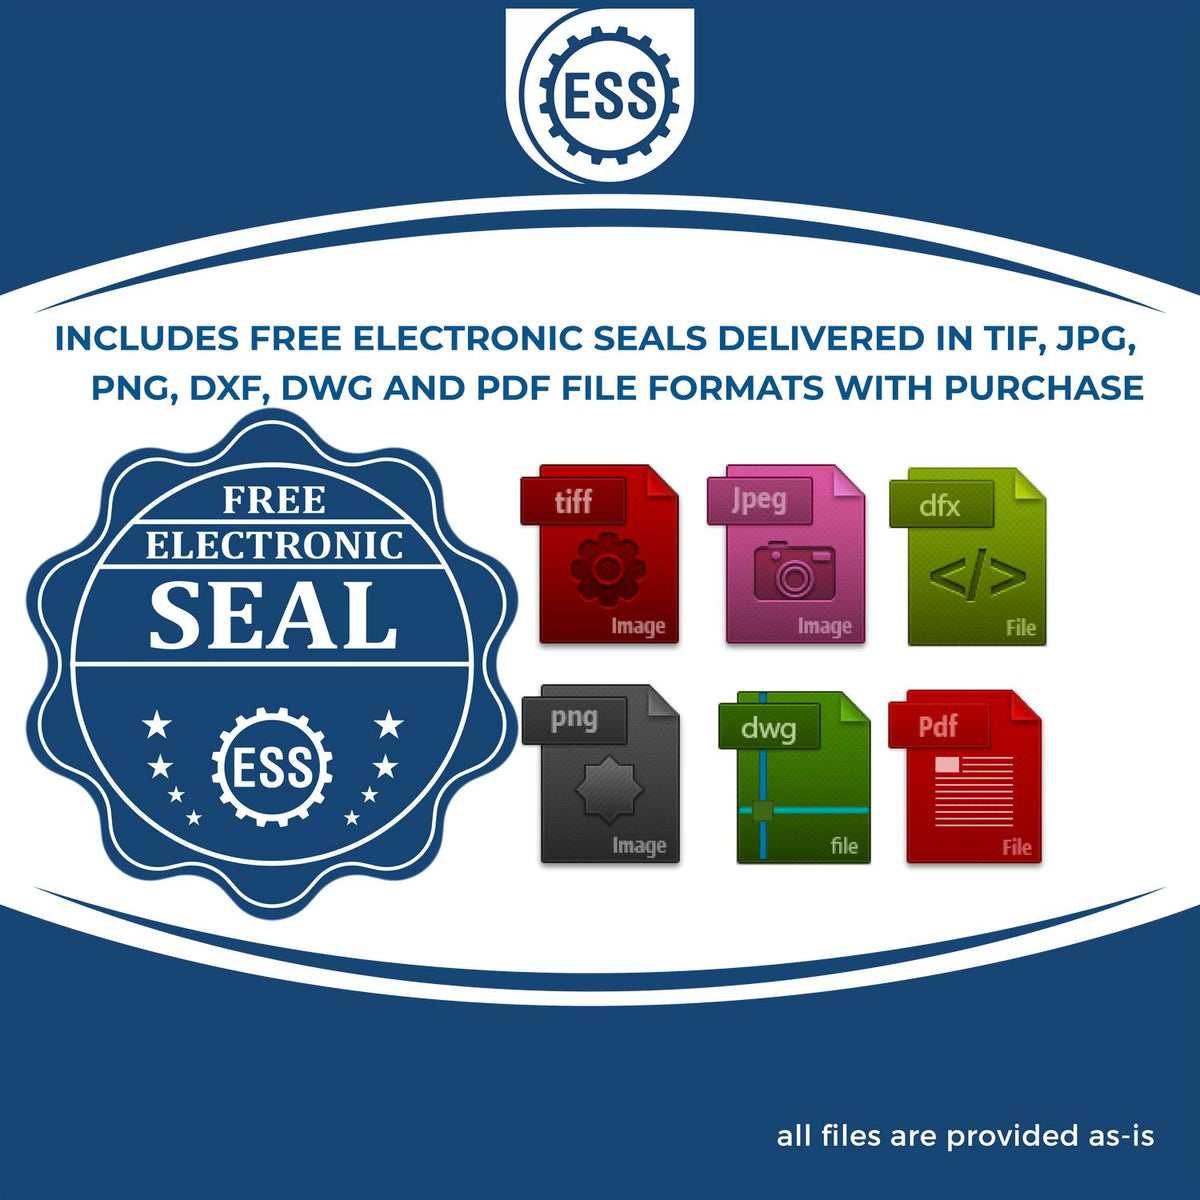 An infographic for the free electronic seal for the Slim Pre-Inked Indiana Landscape Architect Seal Stamp illustrating the different file type icons such as DXF, DWG, TIF, JPG and PNG.